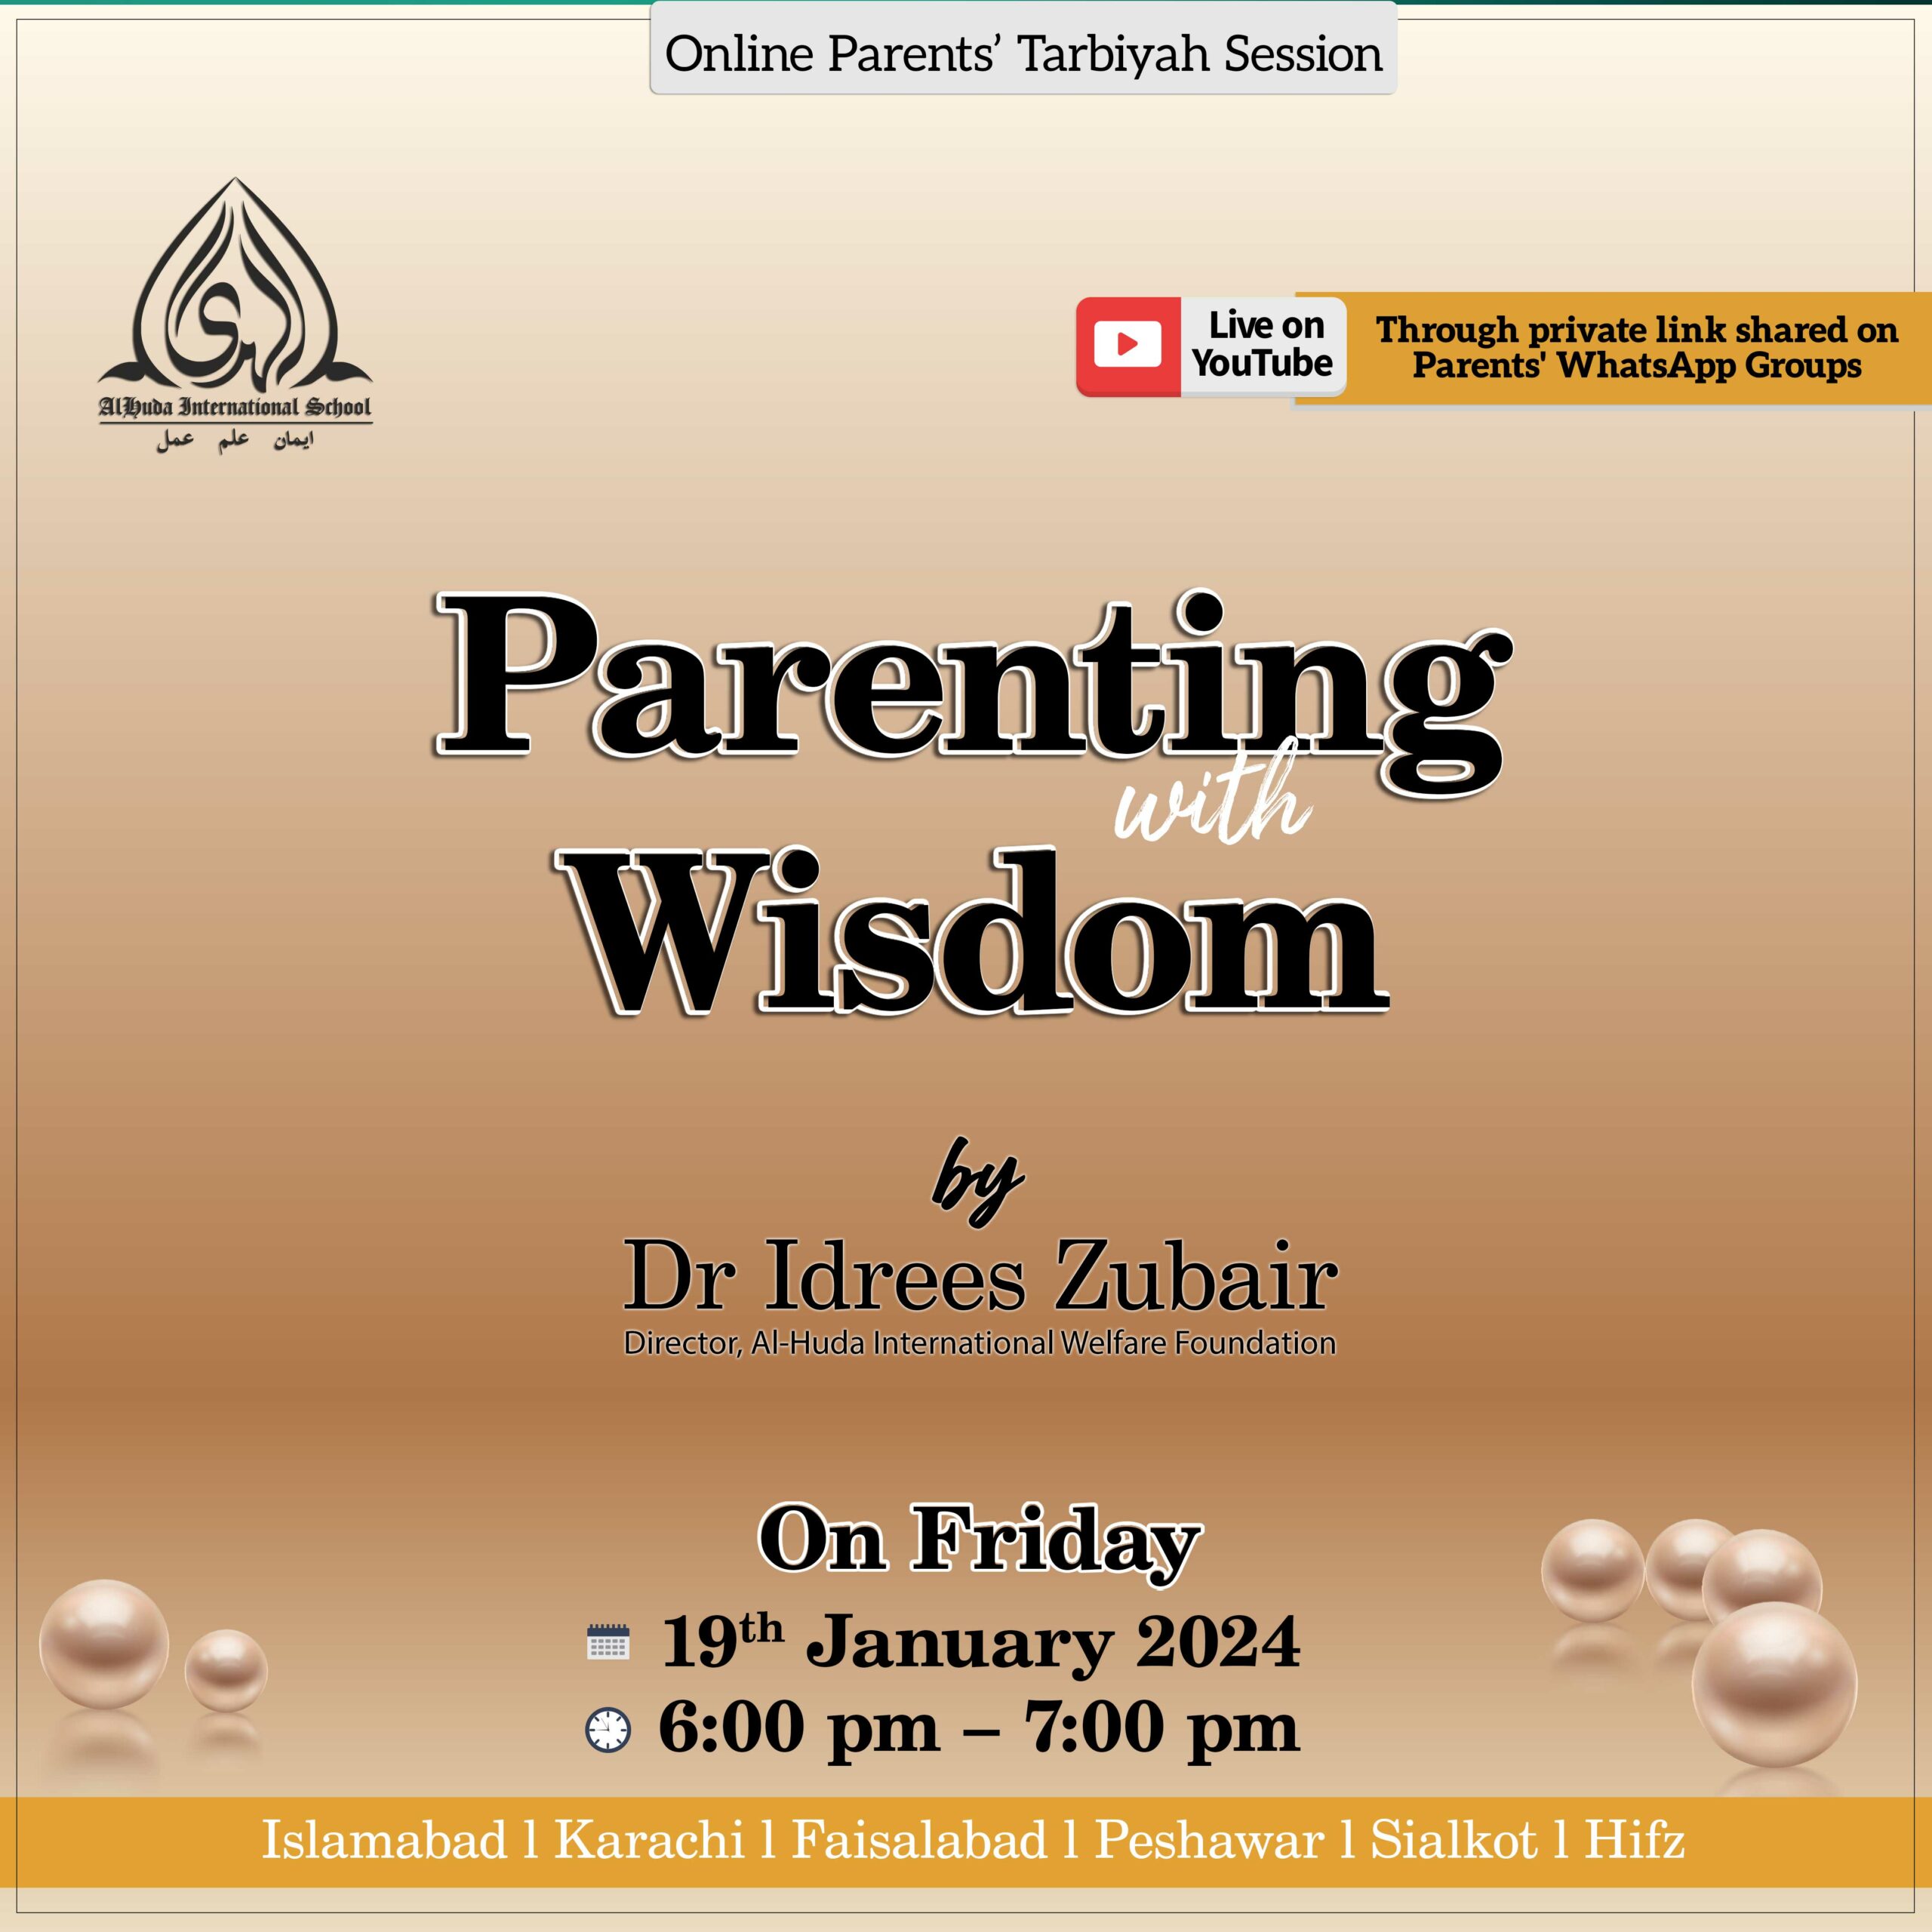 PARENTING WITH WISDOM BY DR IDREES ZUBAIR